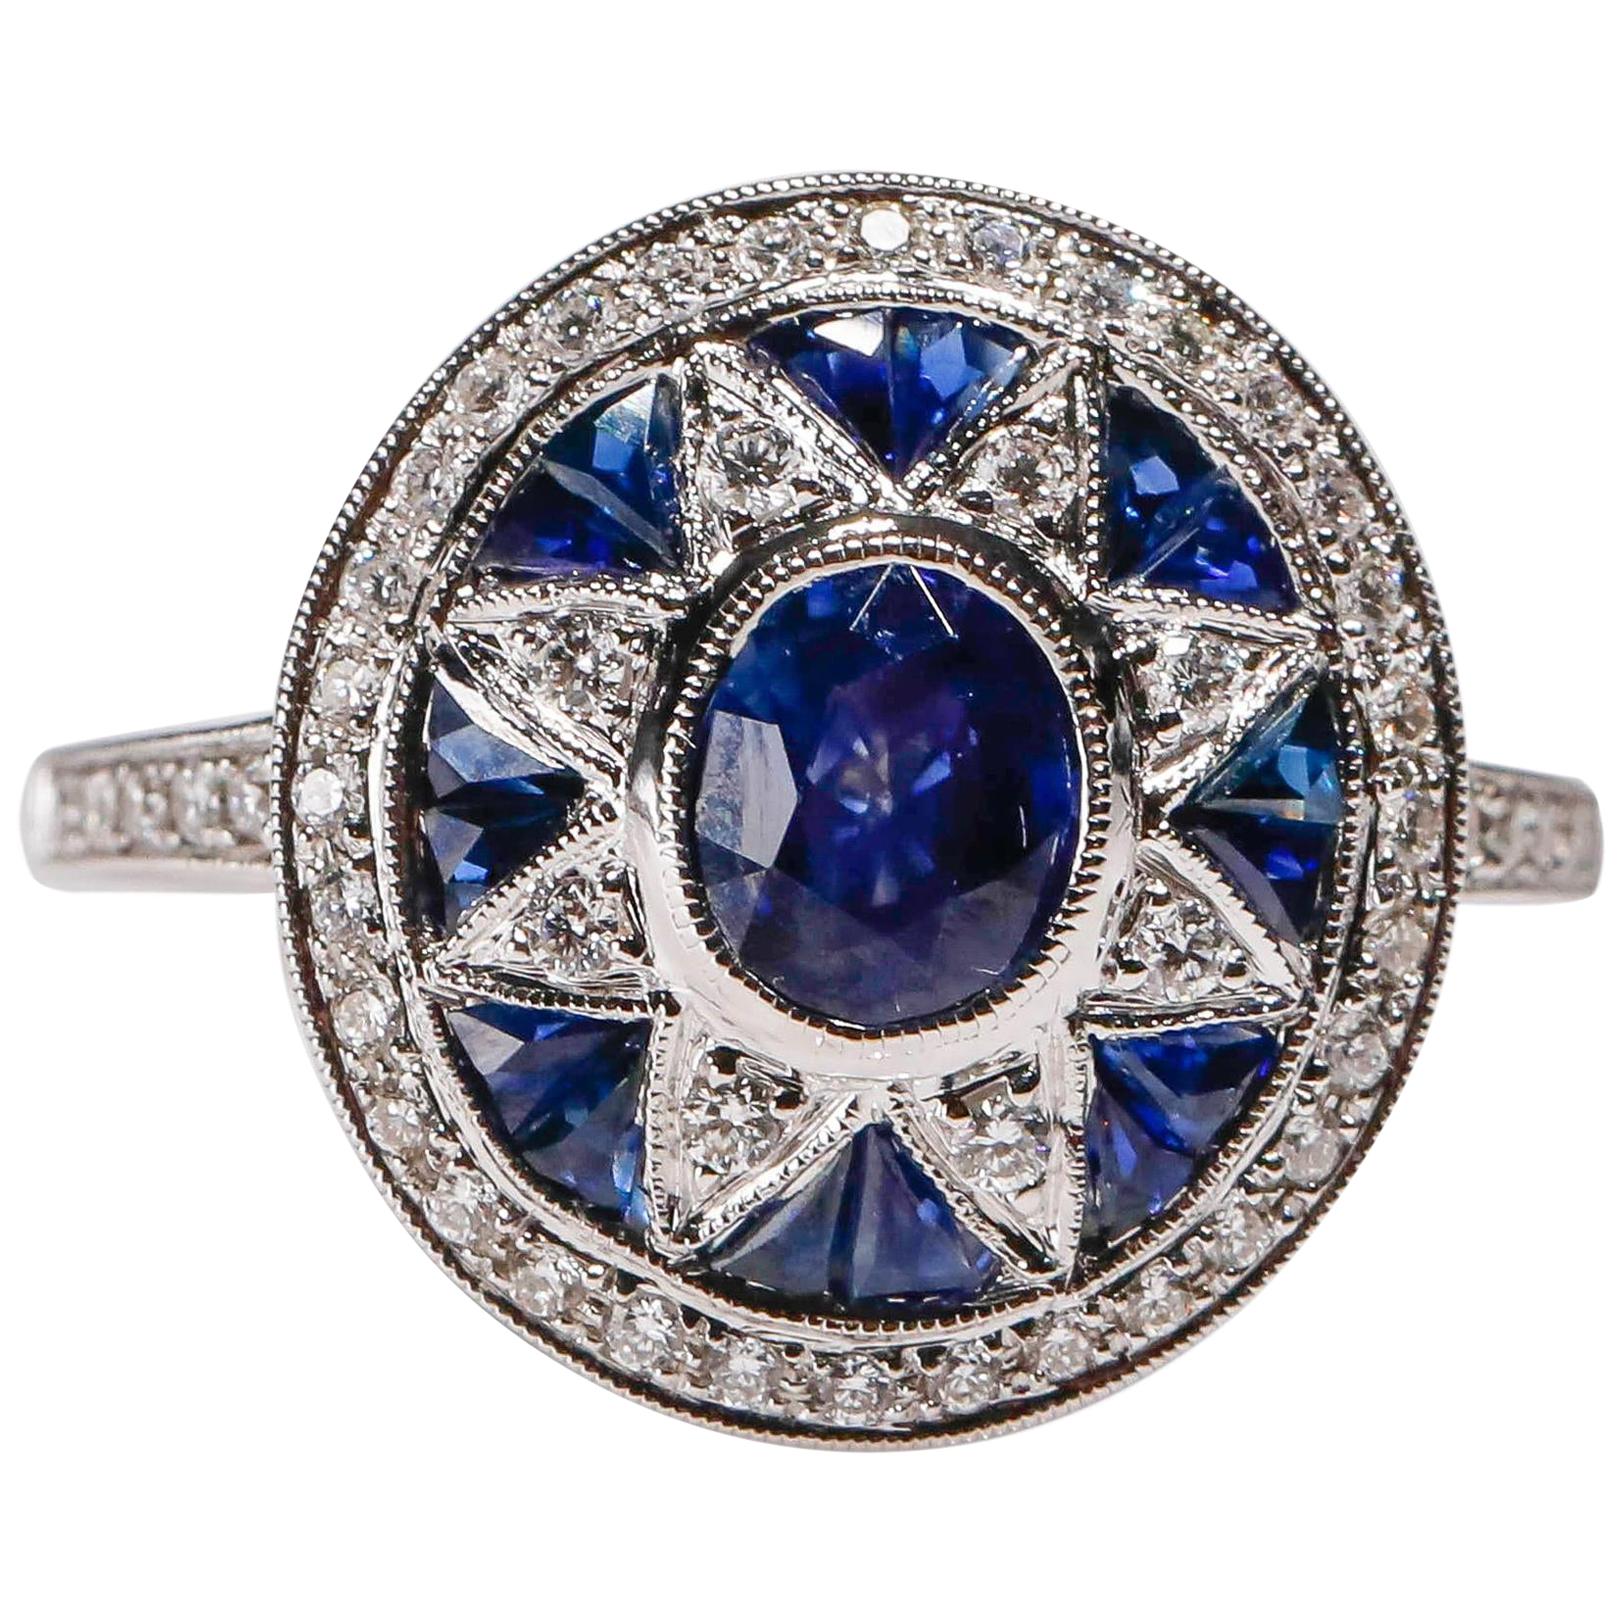 Art Deco Inspired New 1.97 Carat Sapphire 0.32 Carat Diamond 18K White Gold Ring

This ring is brand new. It has been created to look like an elegant ring from the Art Deco Era.
The Diamond is Natural. It is a Round Brilliant Cut.

This stunning